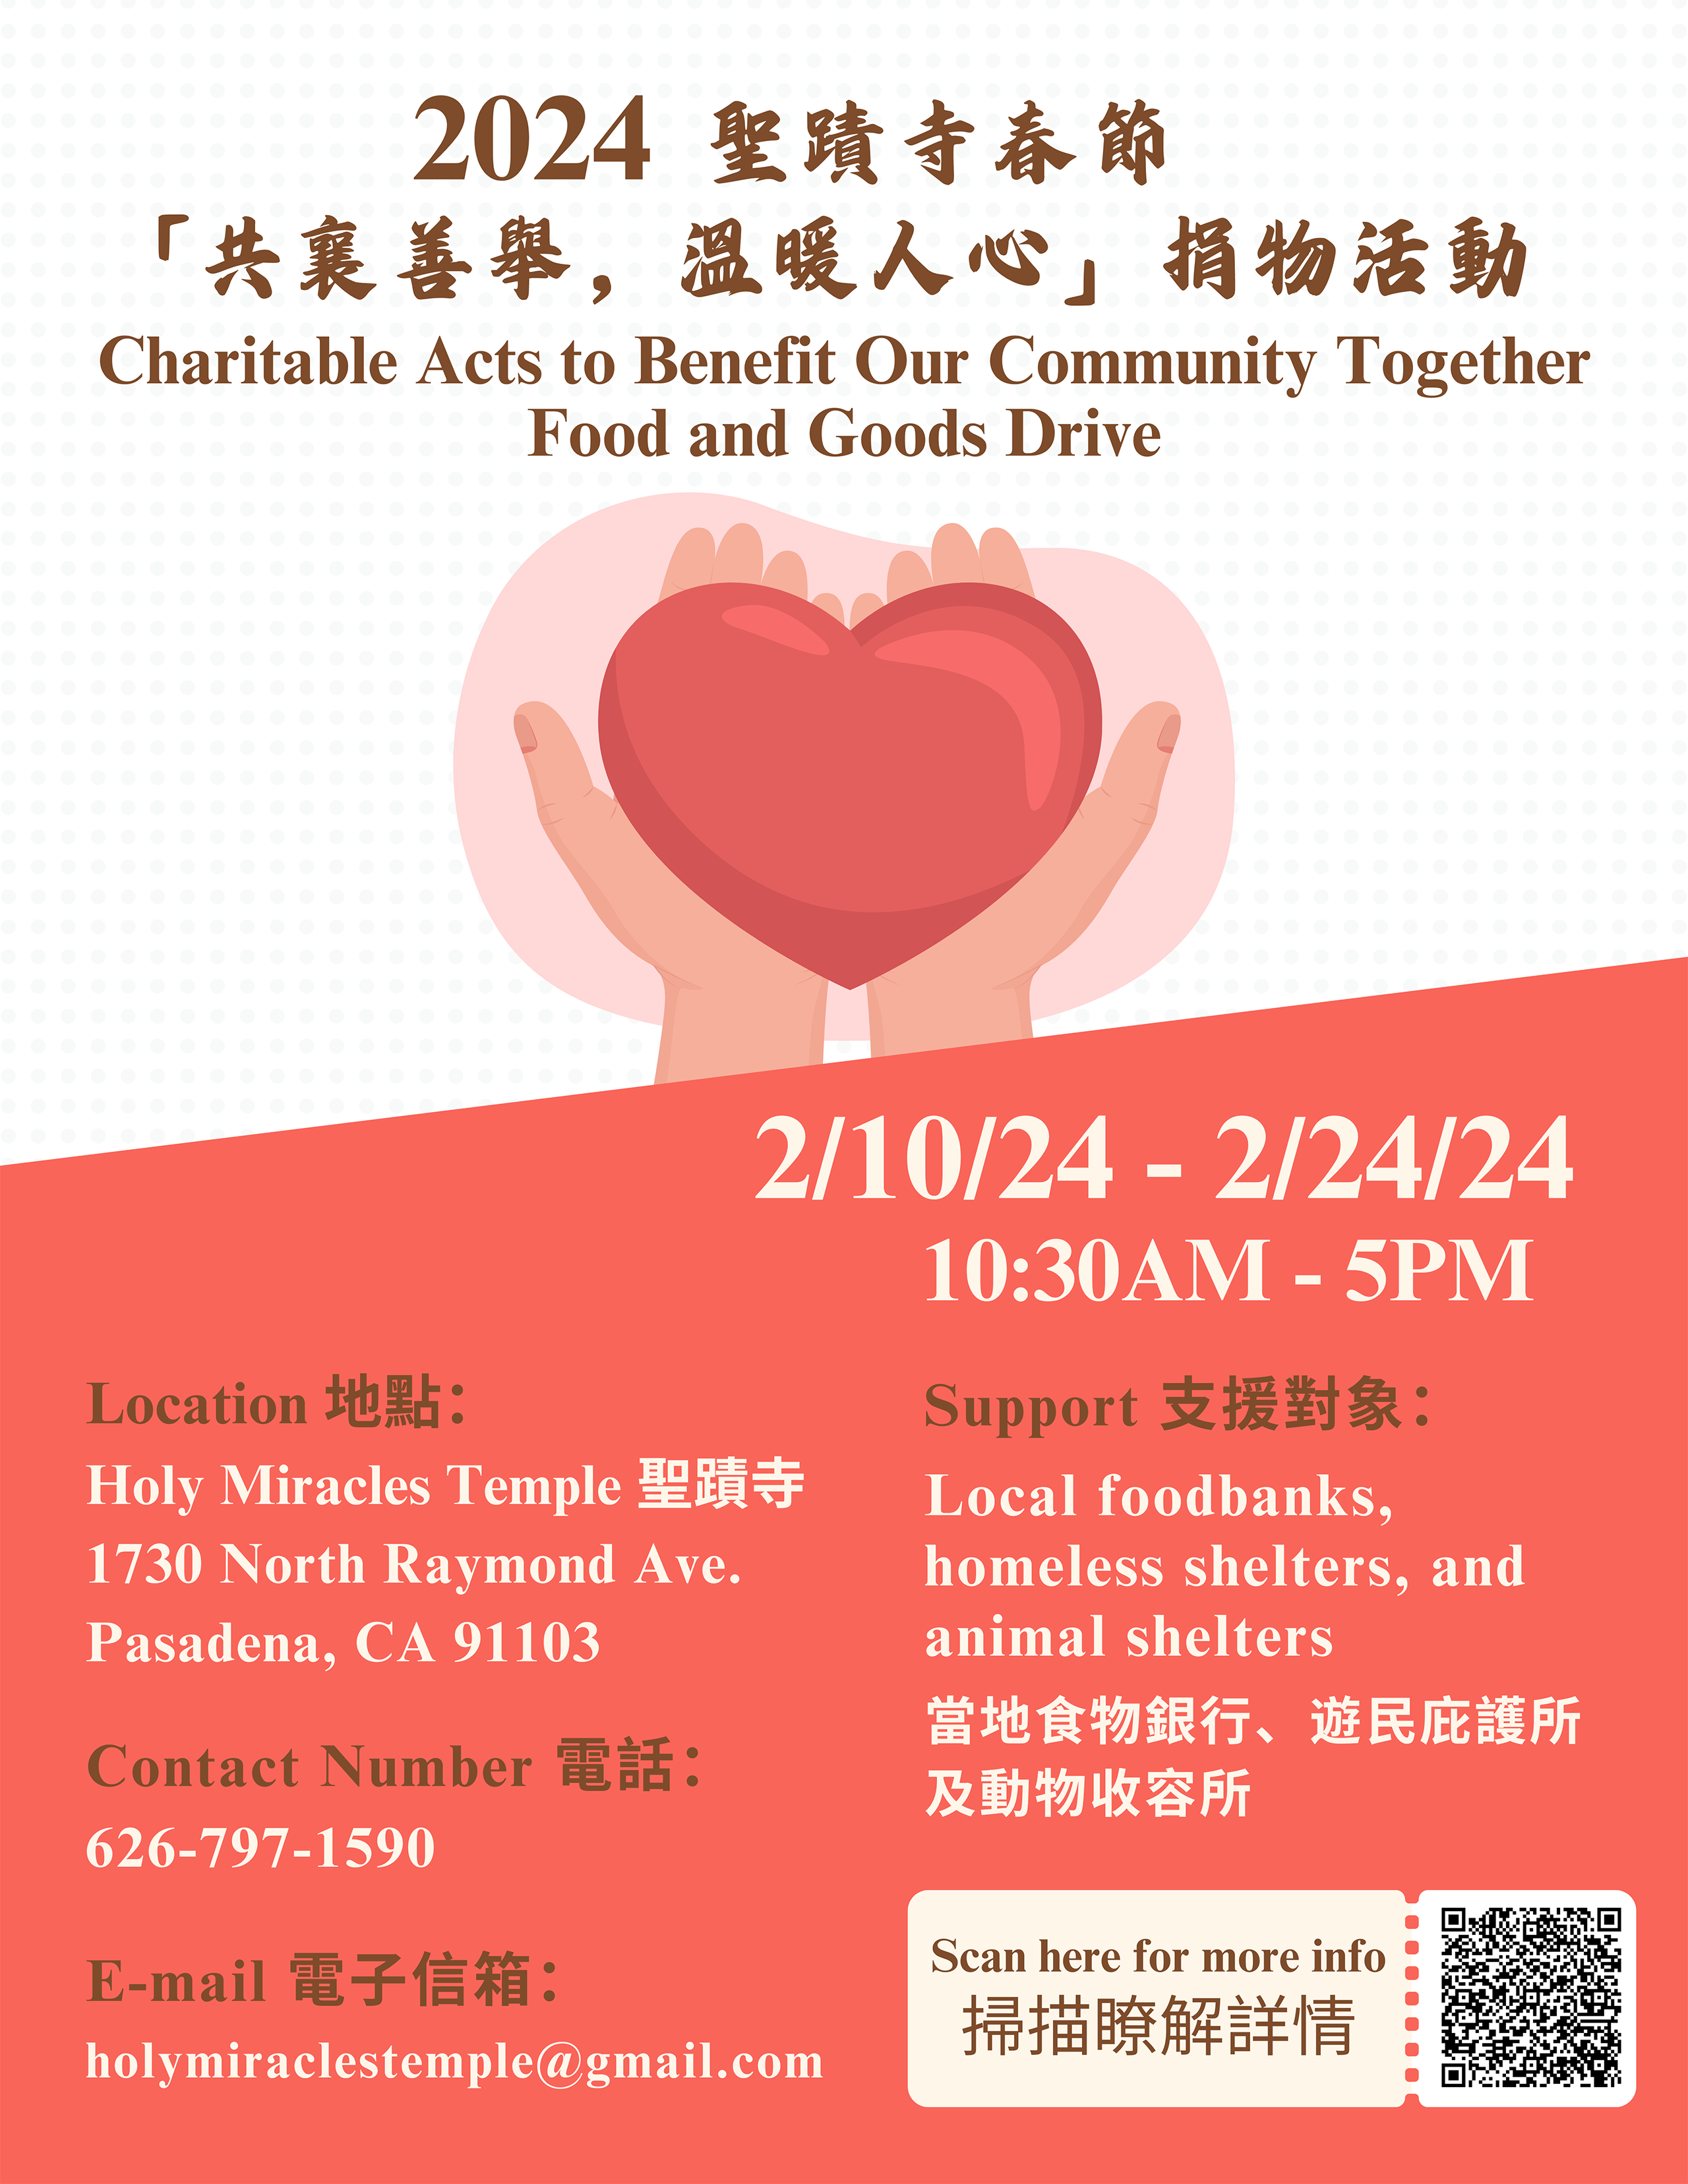 Charitable Acts to Benefit Our Community Together: 2024 Food and Goods Drive